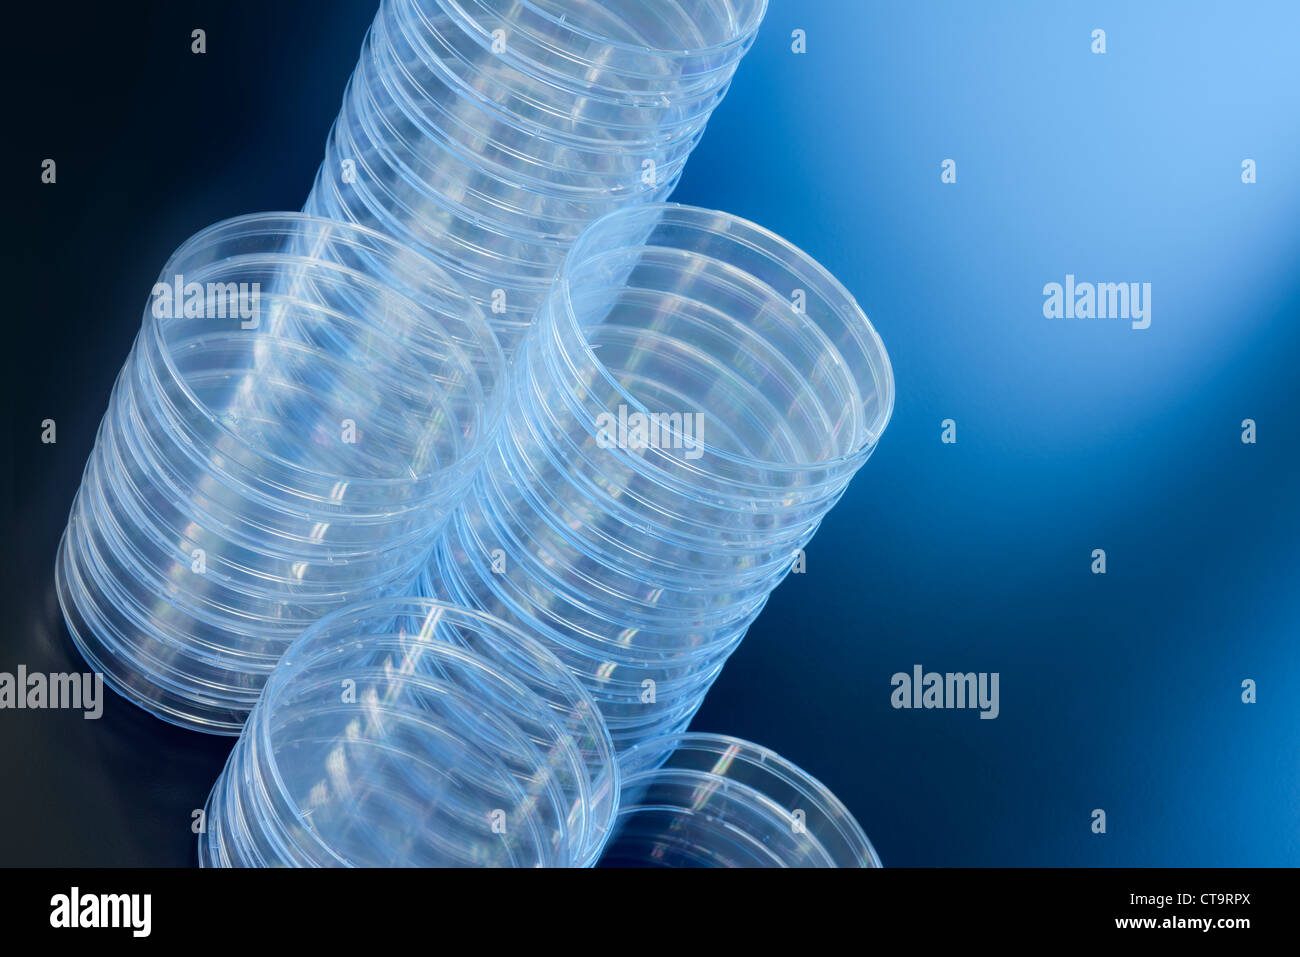 Several stacks of empty petri dishes on a blue background. Stock Photo